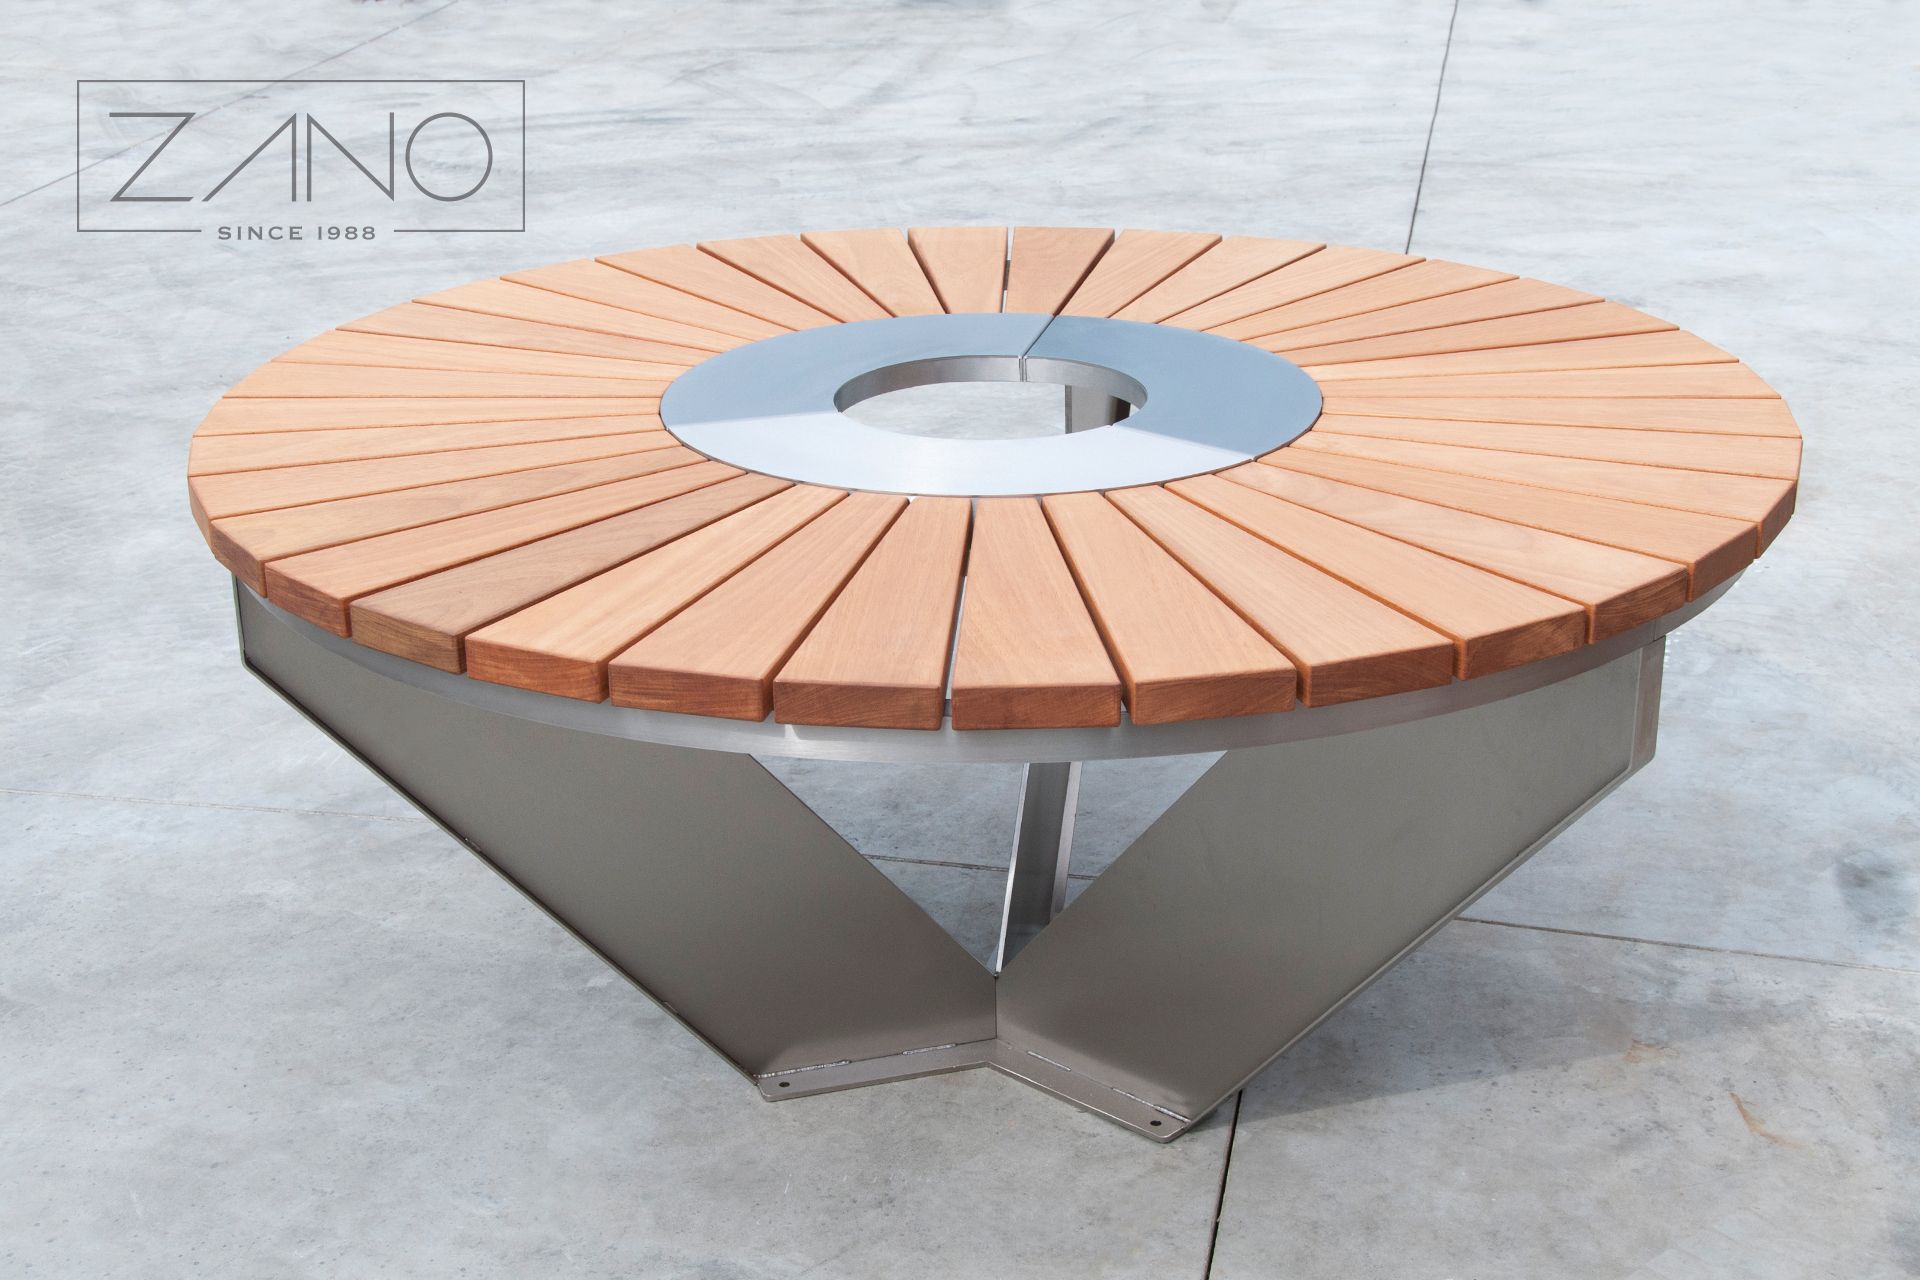 Table made of stainless steel and hardwood